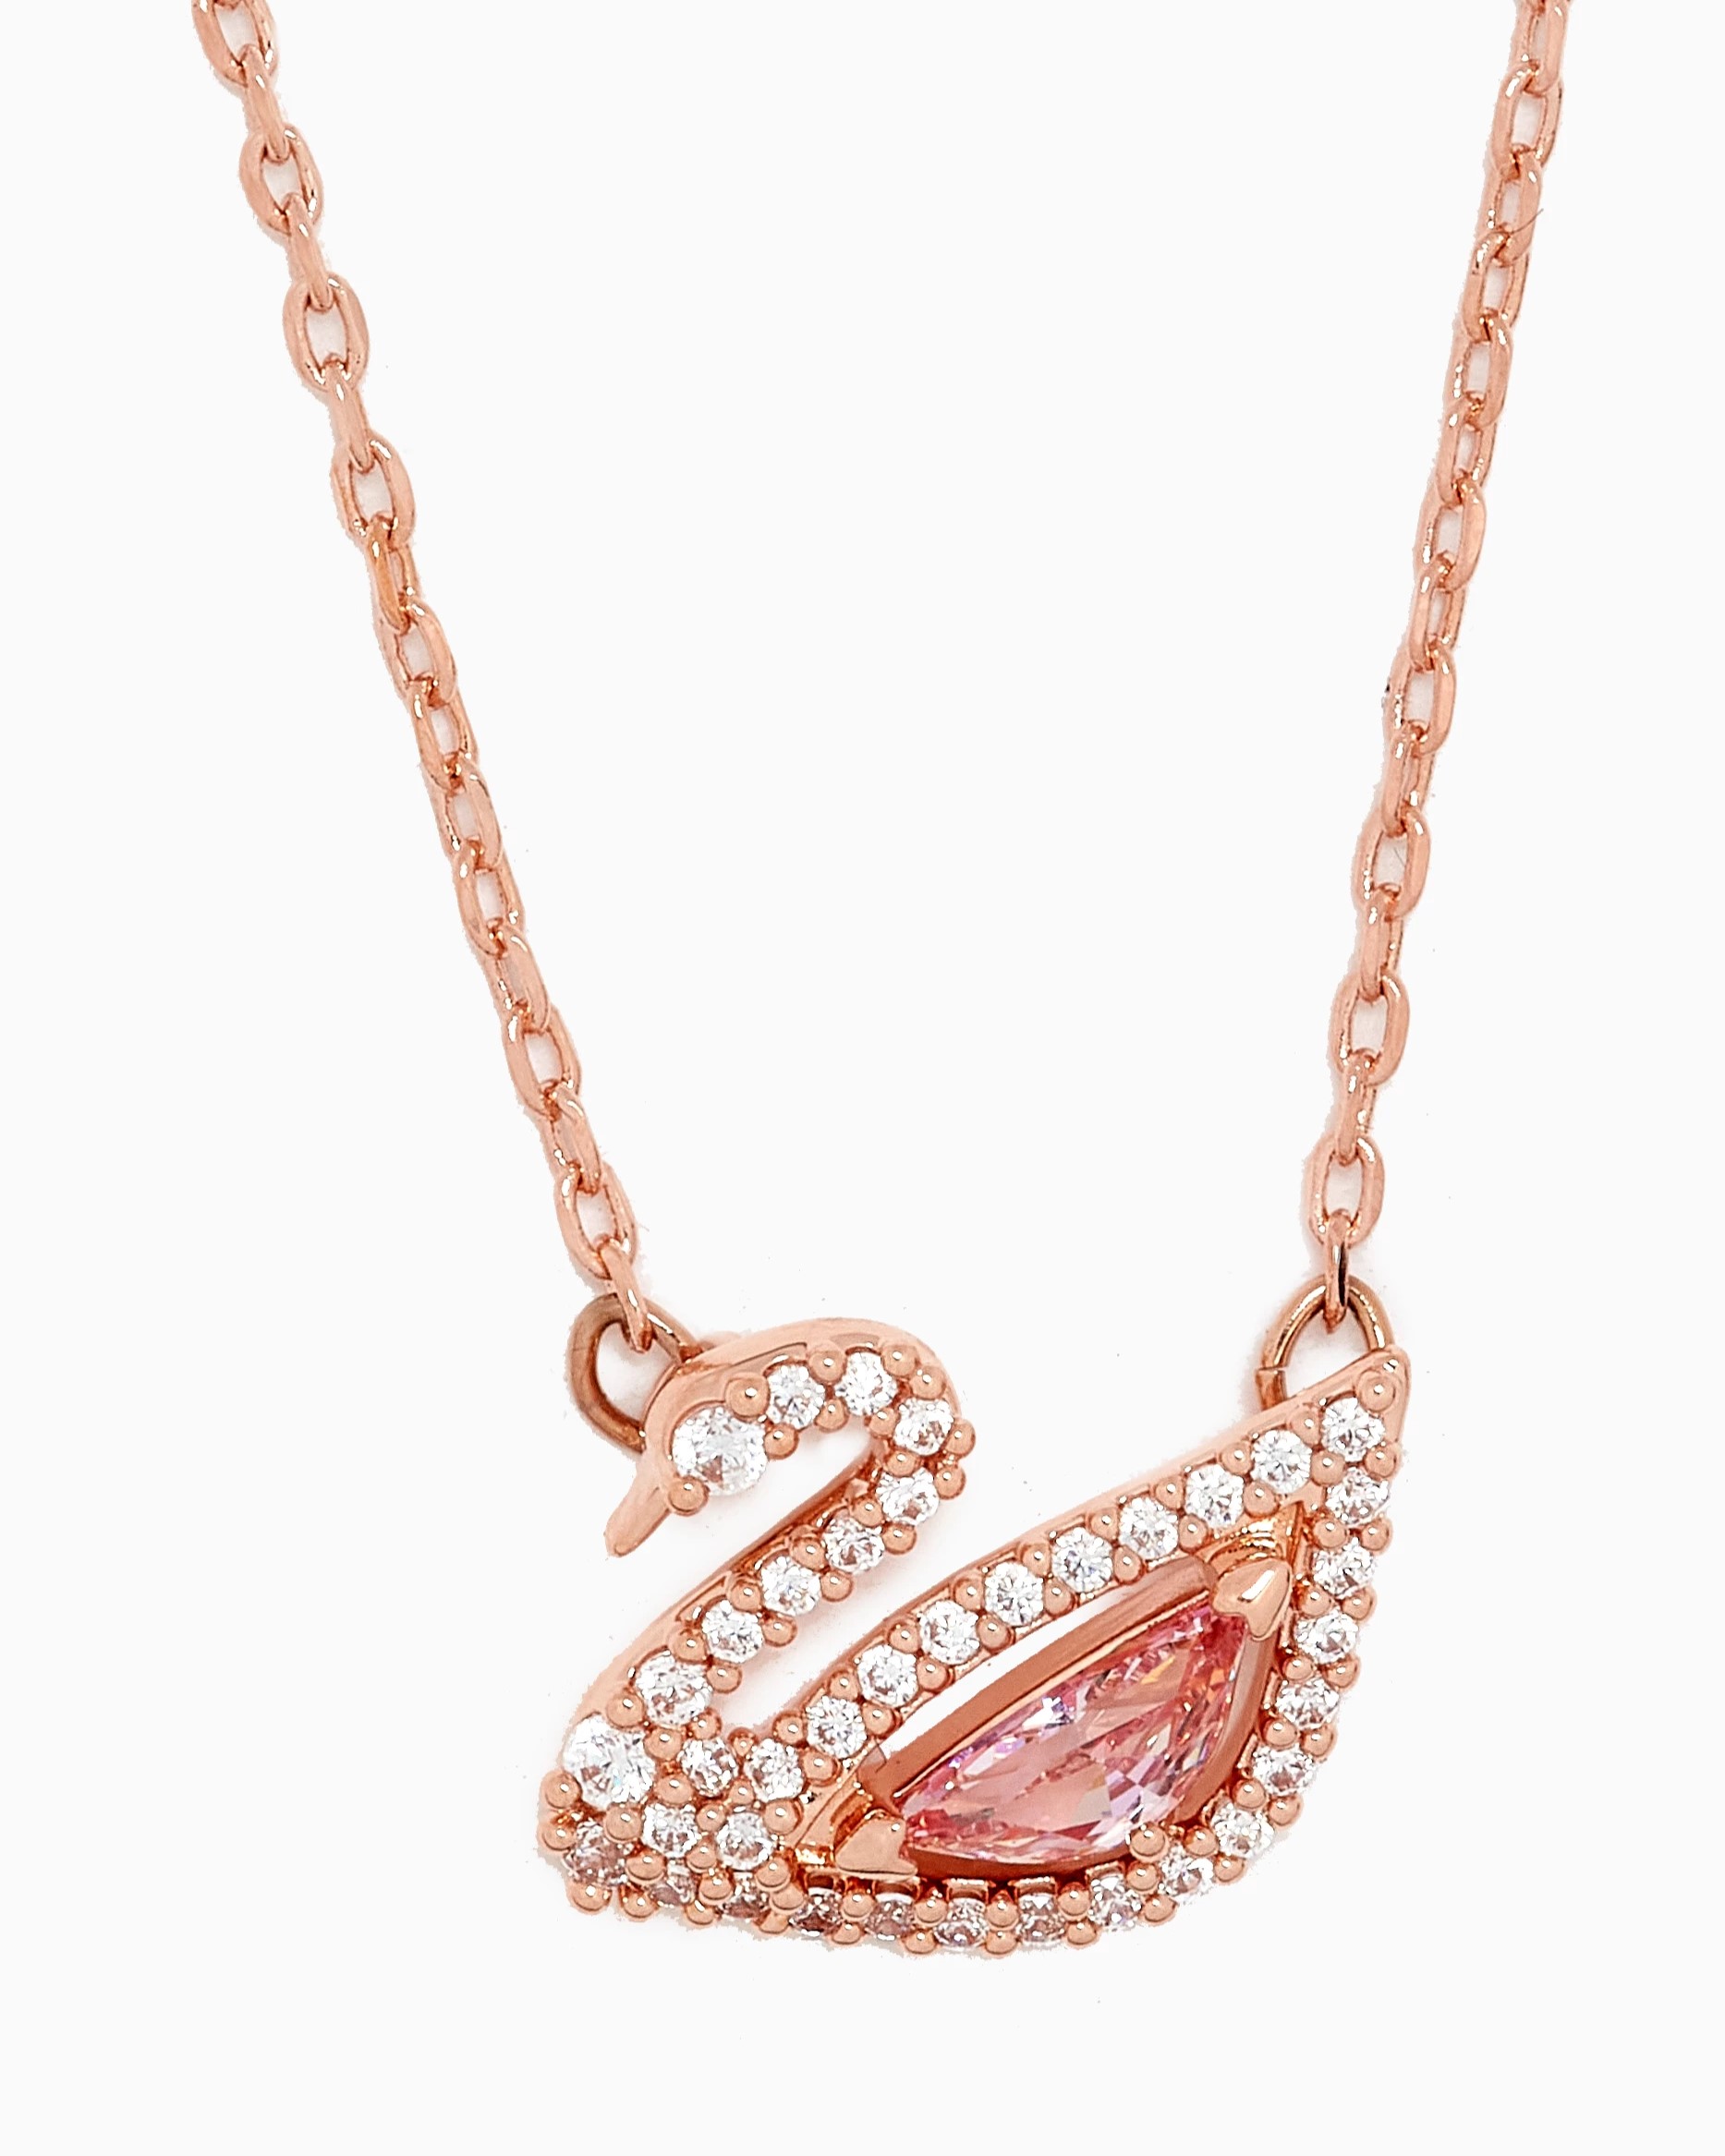 SET DÂY CHUYỀN VÒNG ĐEO TAY SWAROVSKI DAZZLING SWAN NECKLACE MULTI-COLORED ROSE-GOLD TONE PLATED 5469989 12